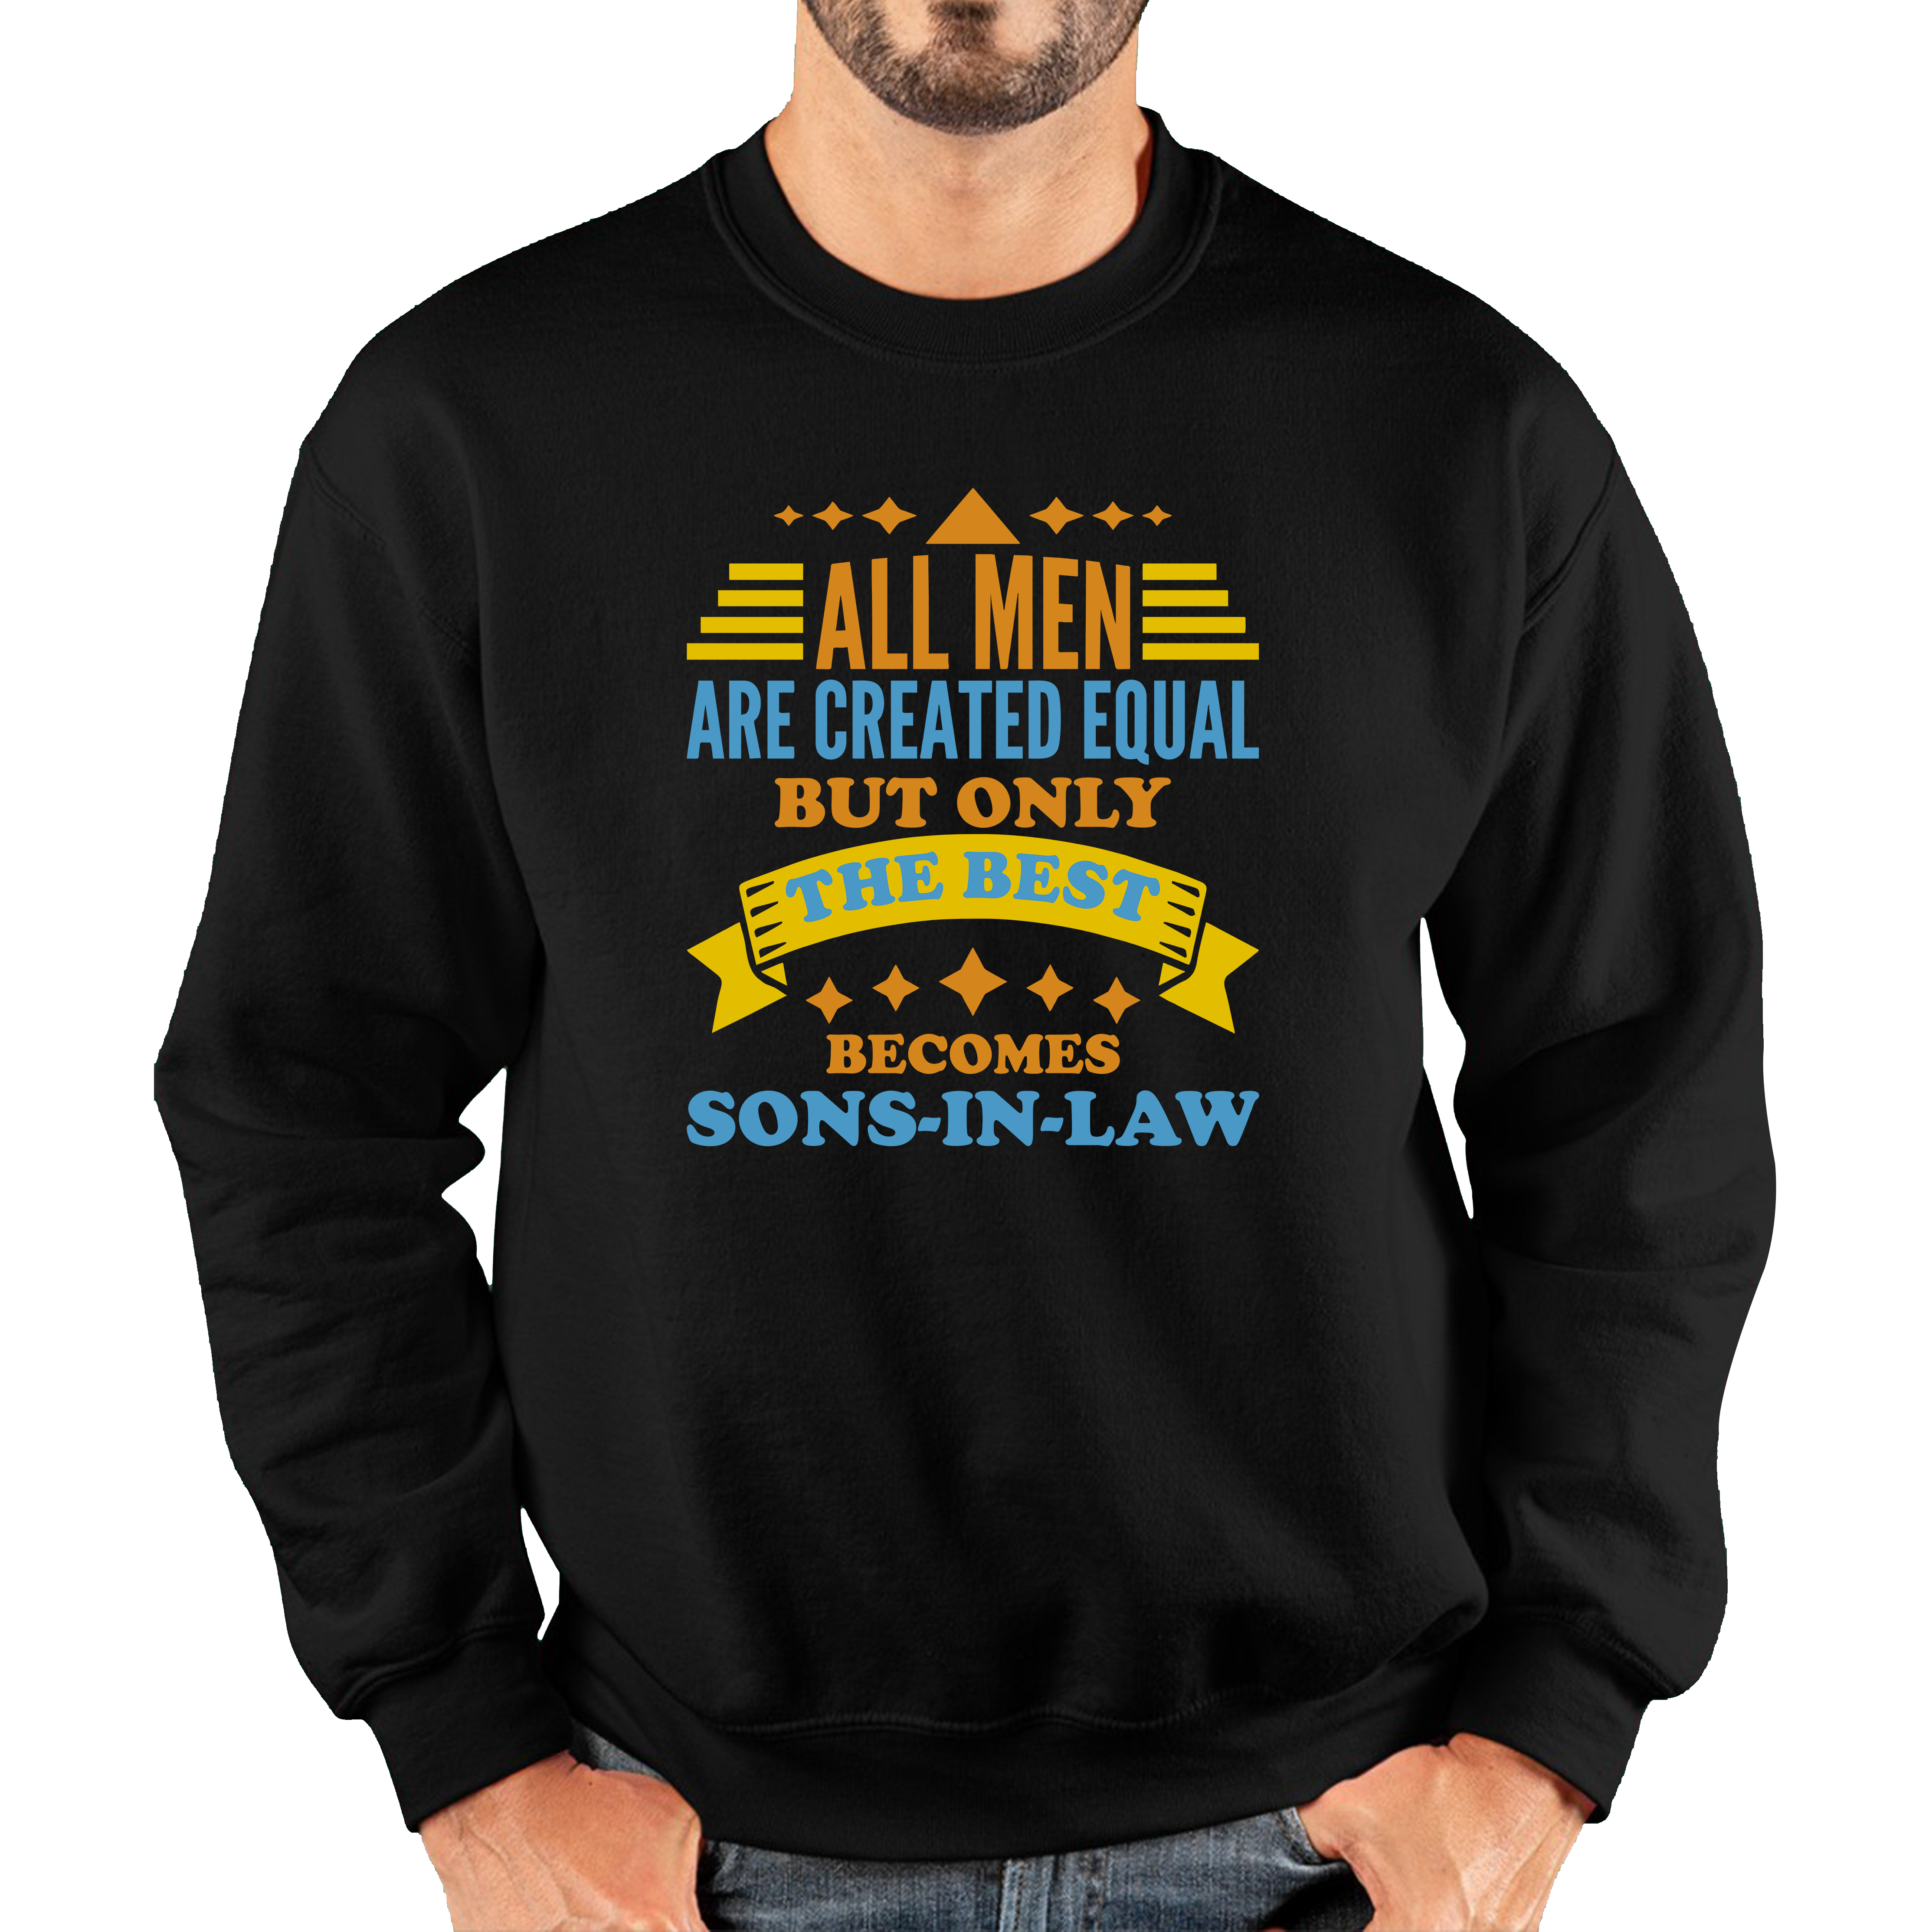 All Men Are Created Equal But Only The Best Becomes Sons-In-Law Unisex Sweatshirt